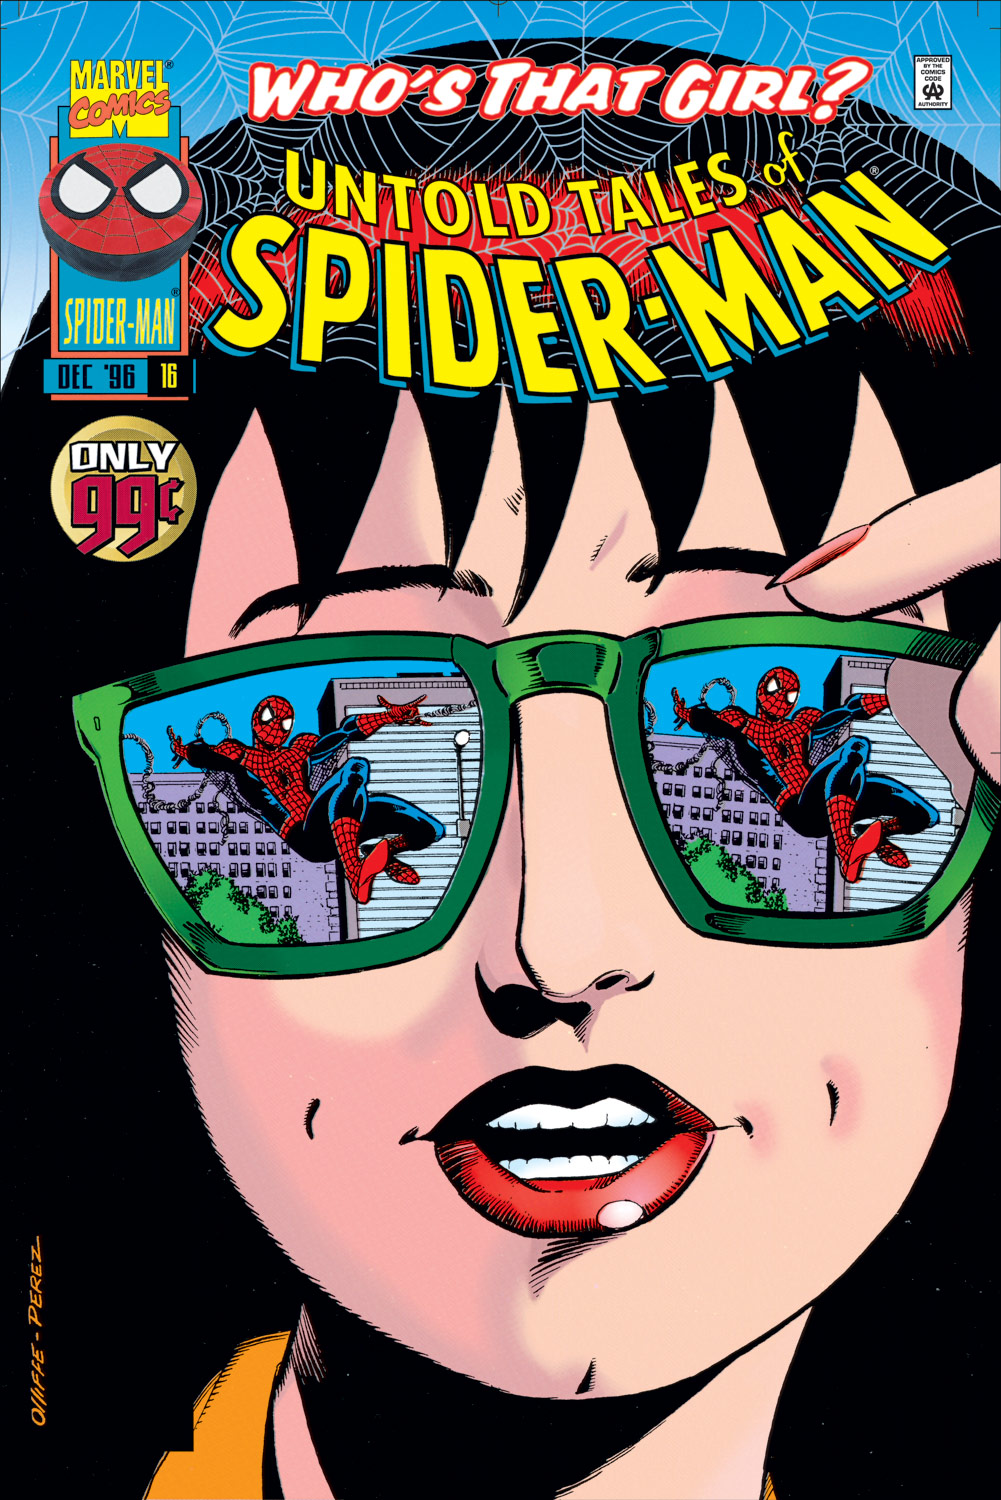 Untold Tales of Spider-Man (1995) #16 | Comic Issues | Marvel